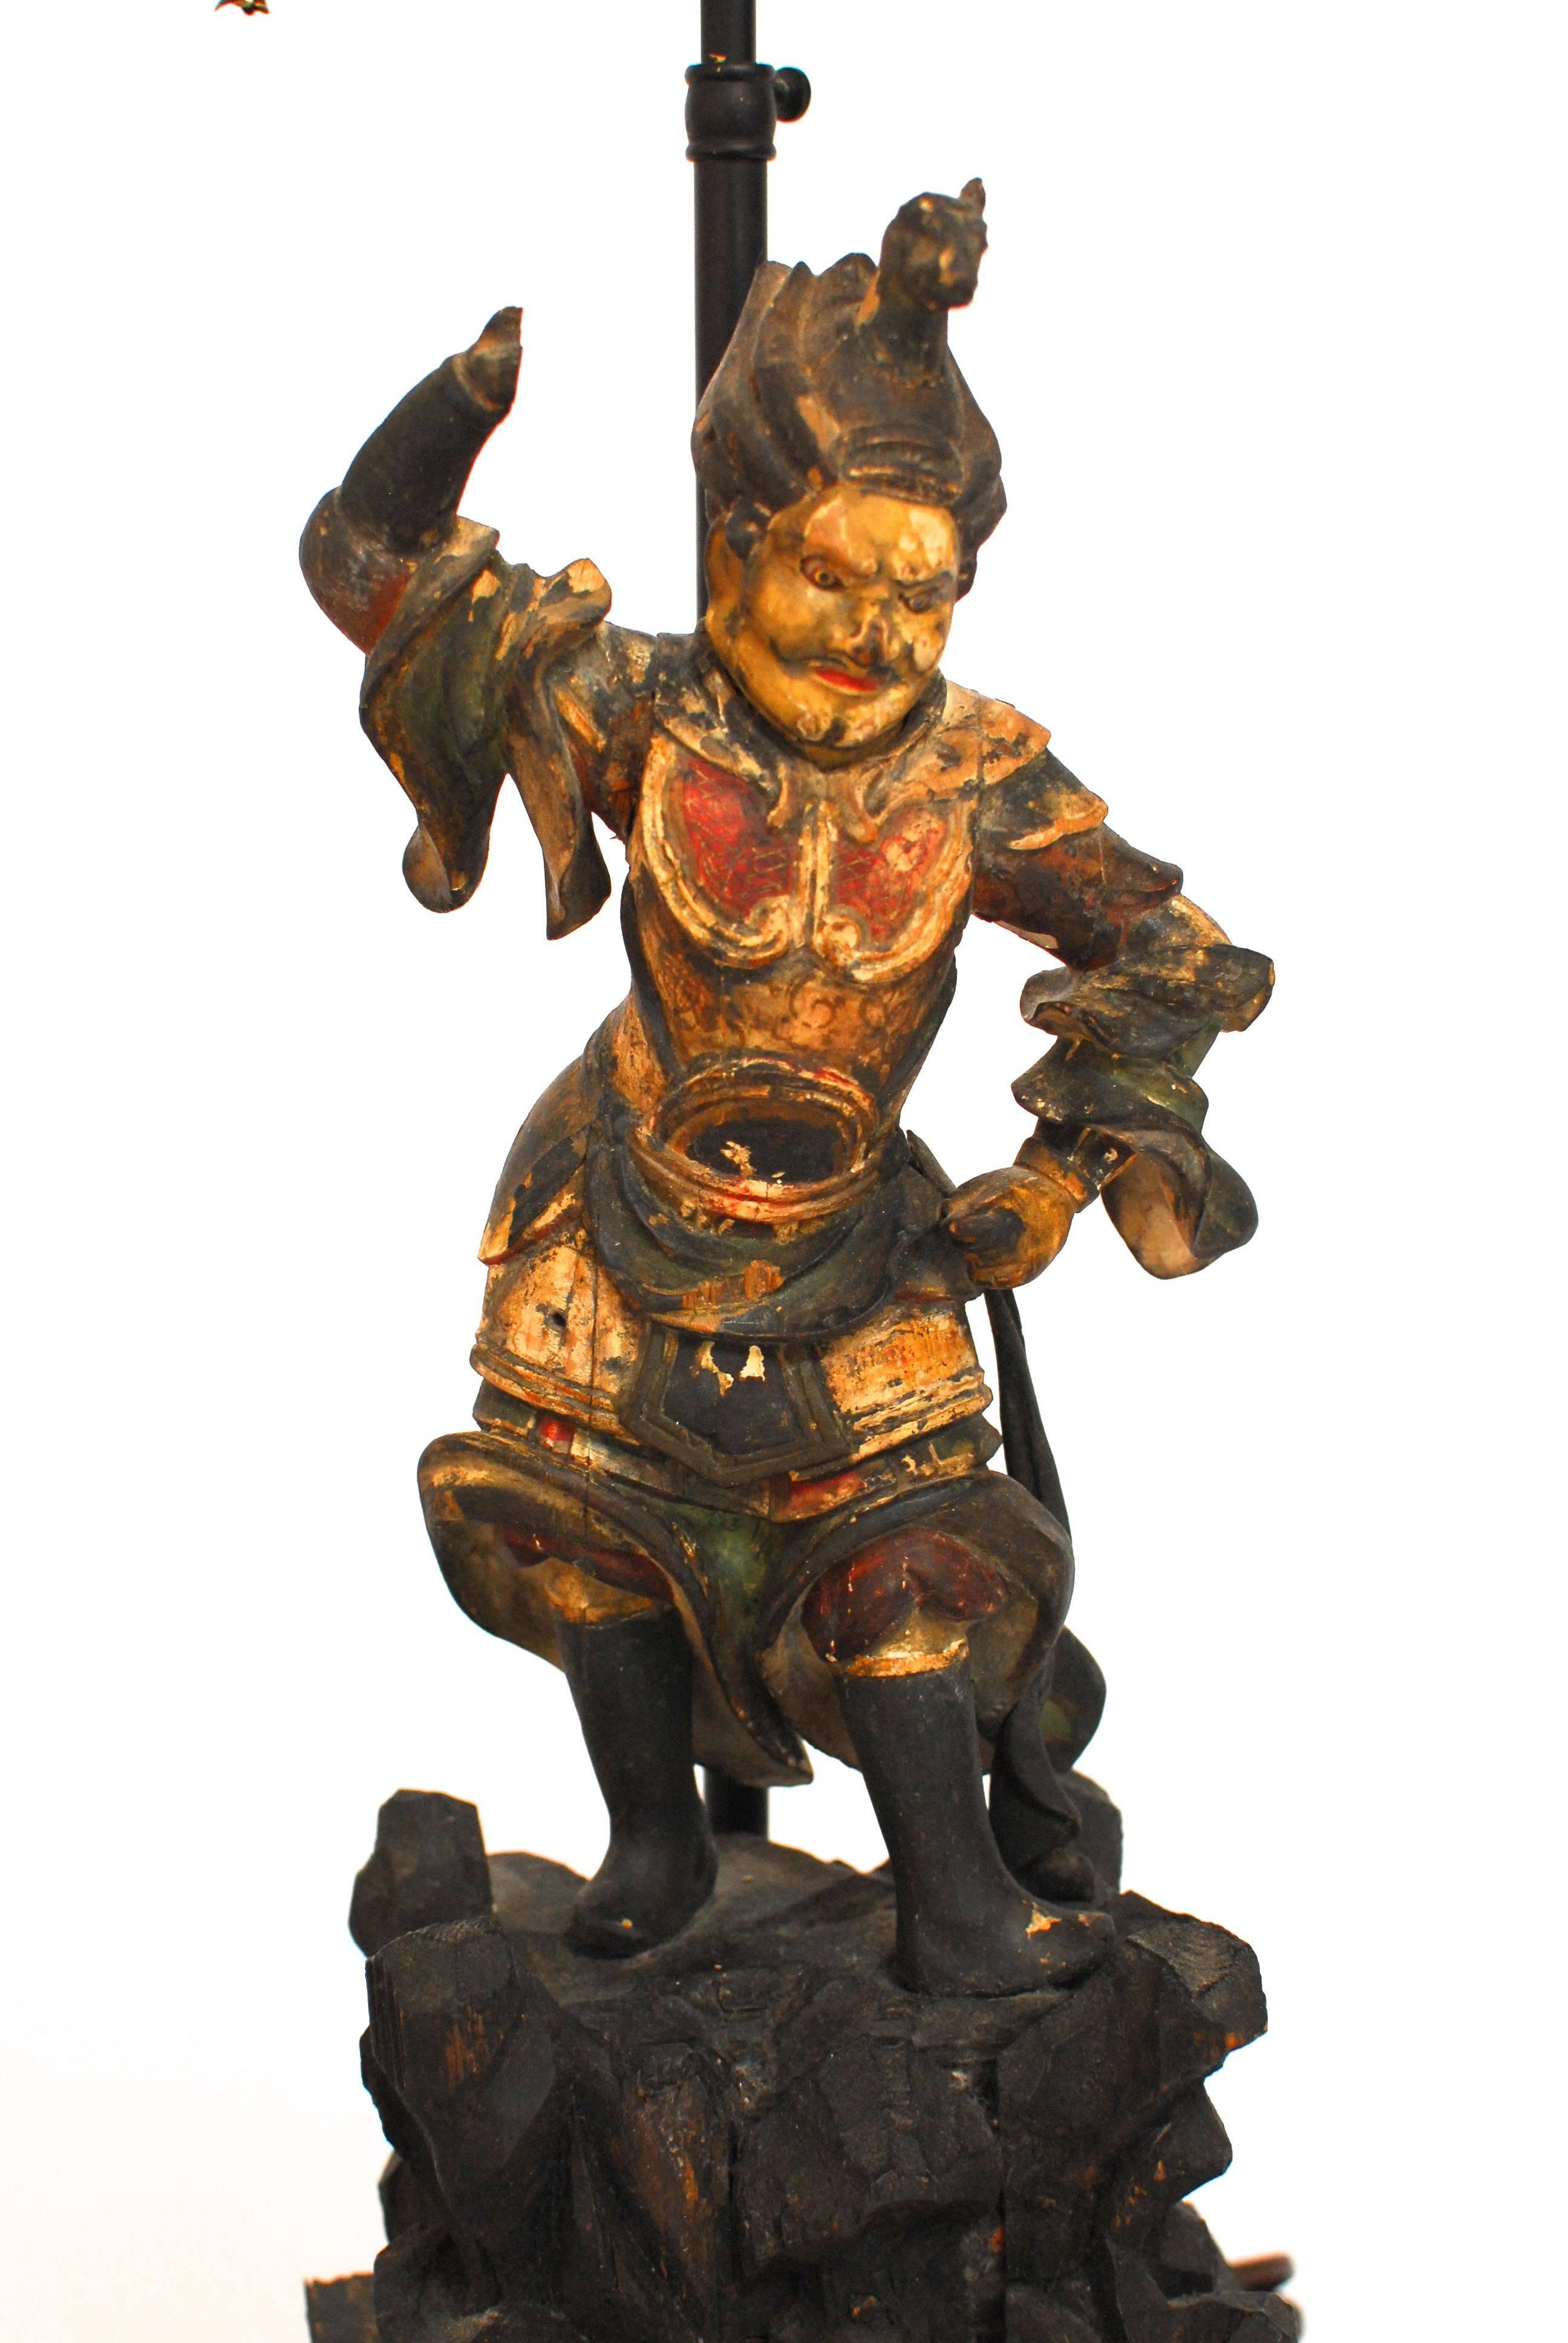 Antique polychrome carved Chinese warrior figurine table lamp. Intricately detailed warrior with a colored costume featuring reds, greens, blacks and whites. Solid wood base with a gilt finish and brass trim.  Circa 1880s with minor chips and fading